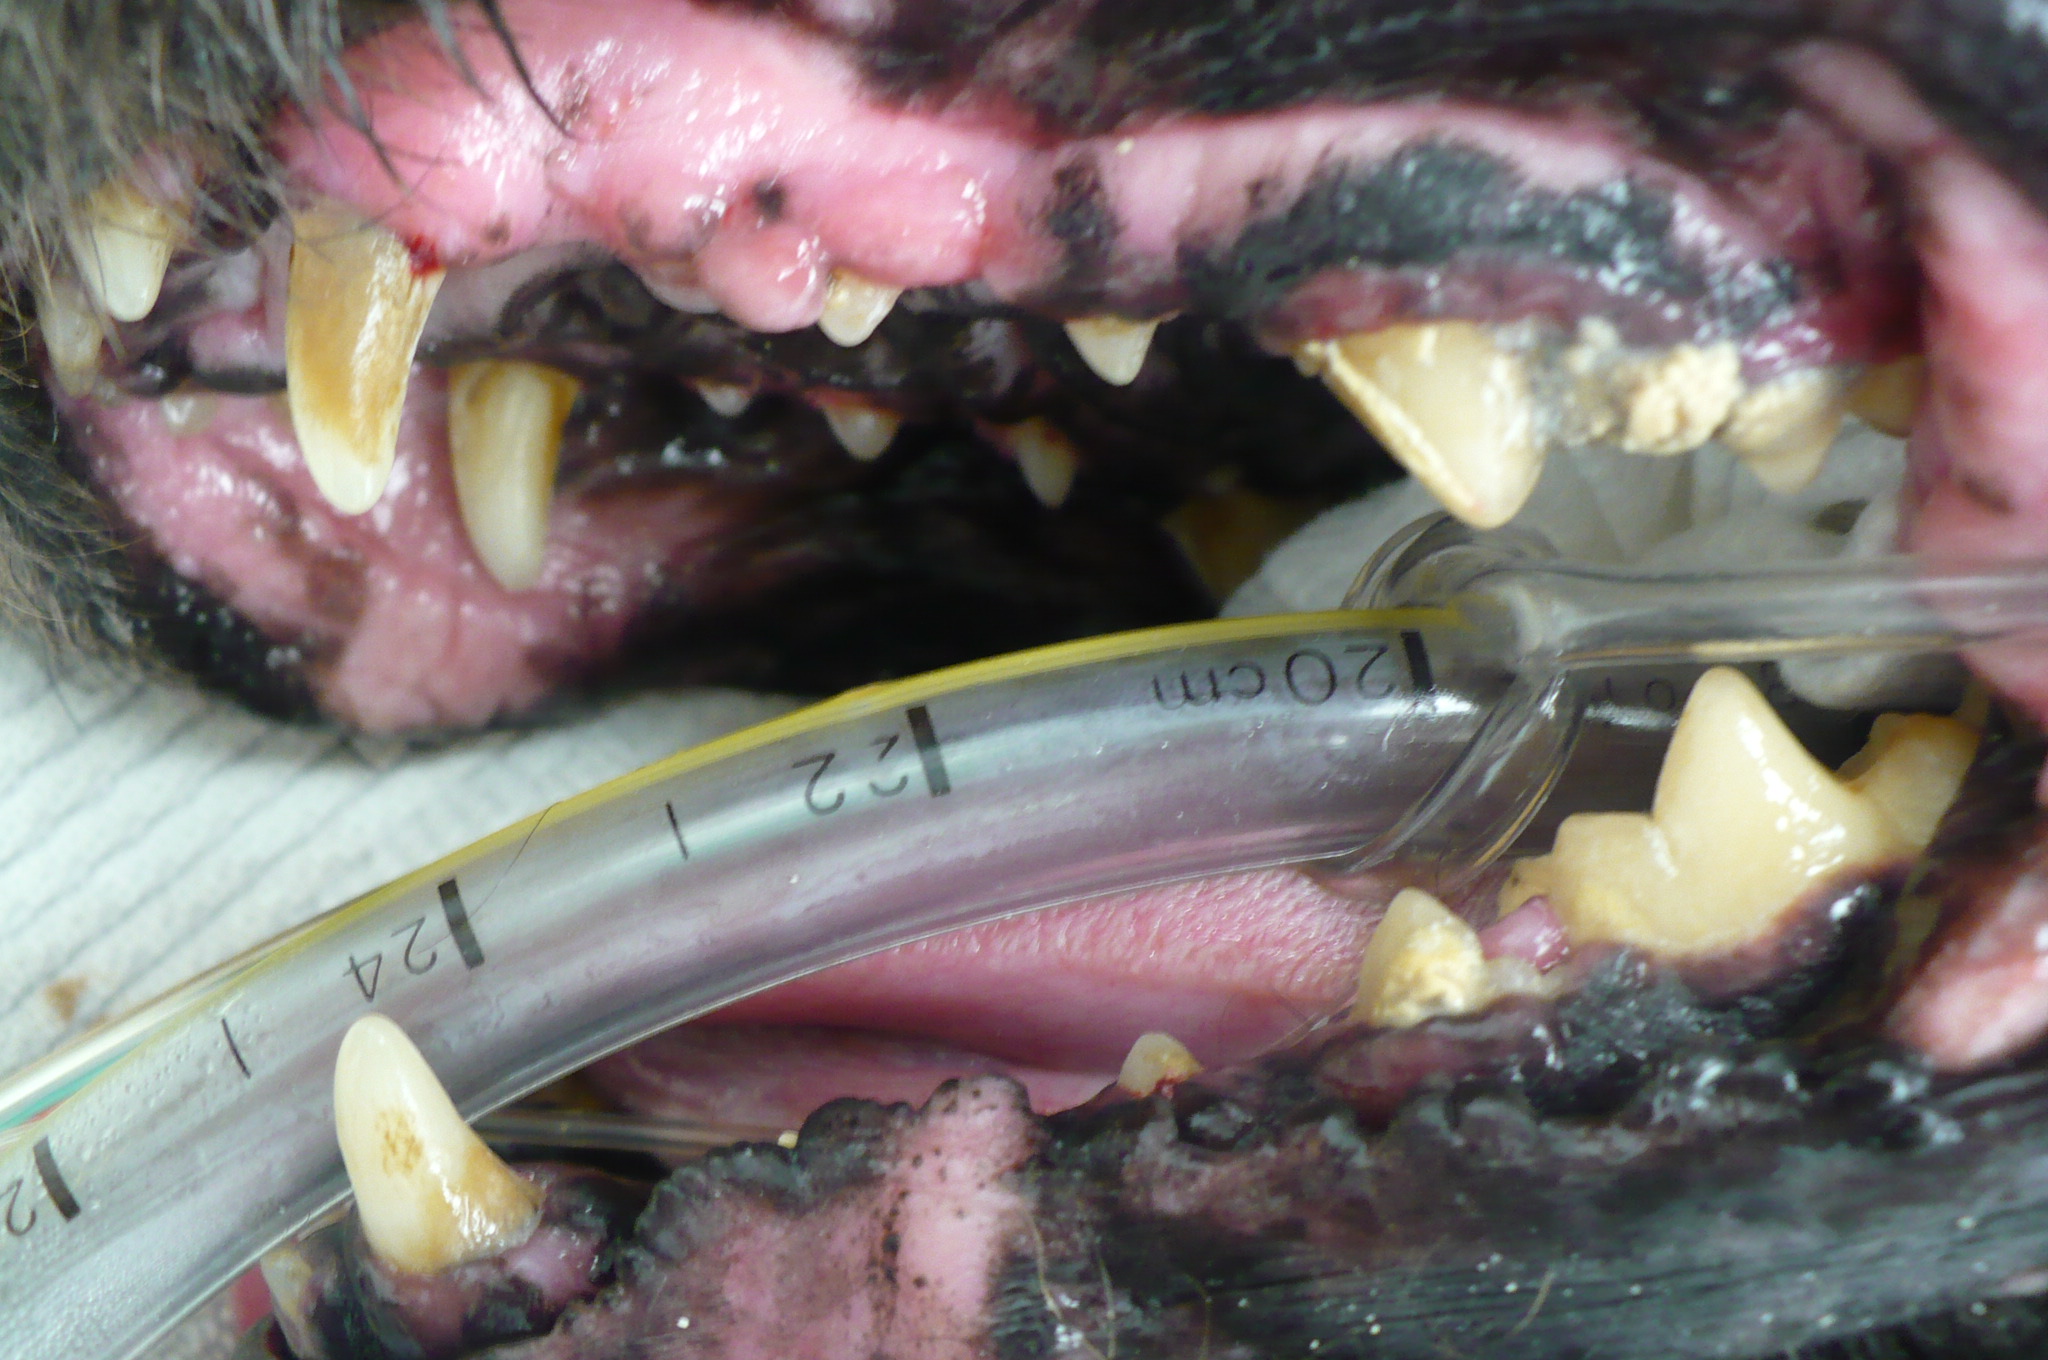 The calculus can hide a lot of disease below the surface. Is this premolar broken? 